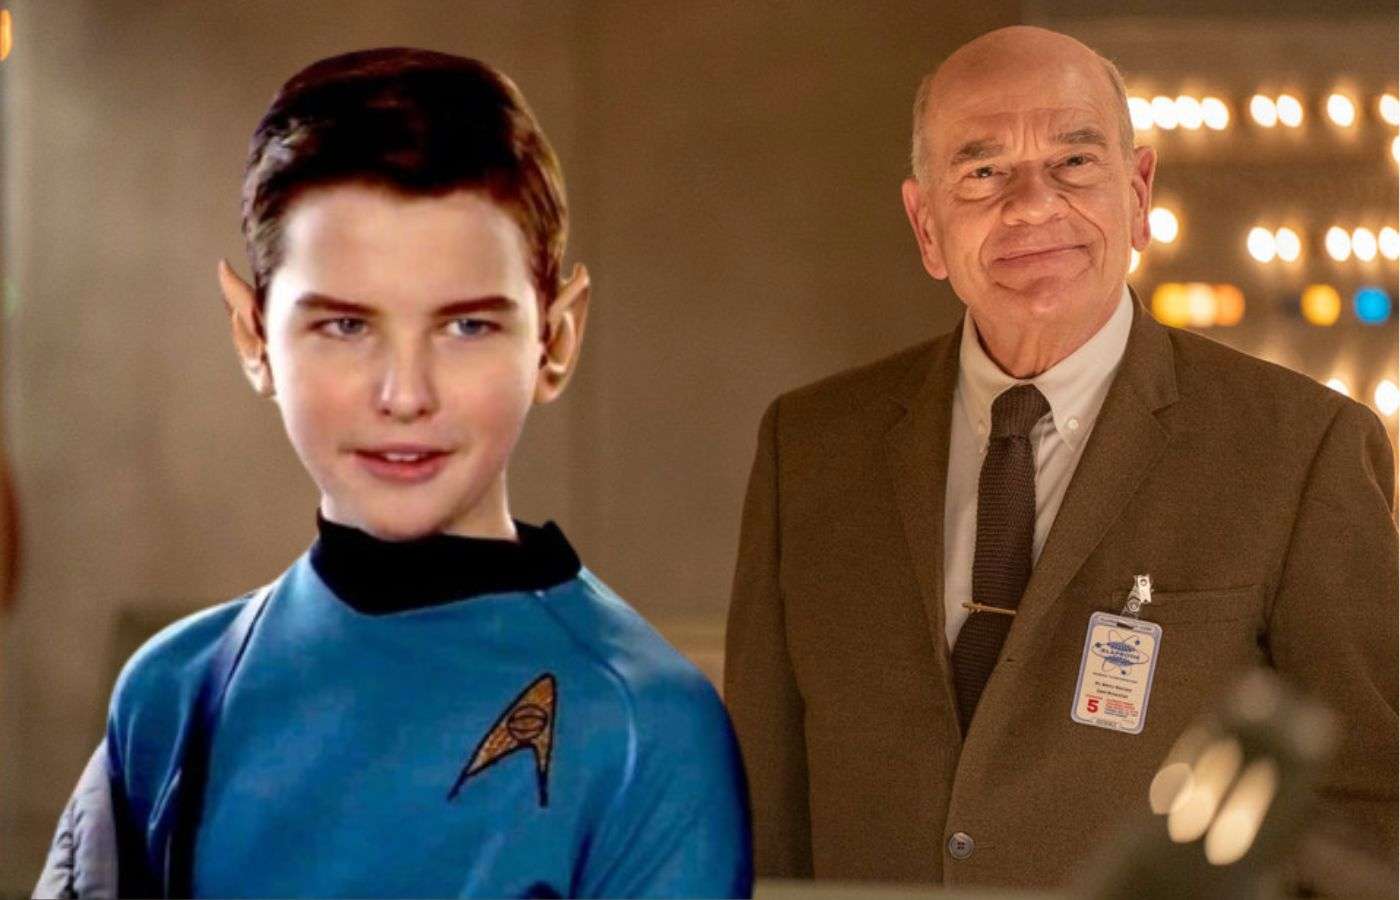 Iain Armitage in Young Sheldon and Robert Picardo in Quantum Leap